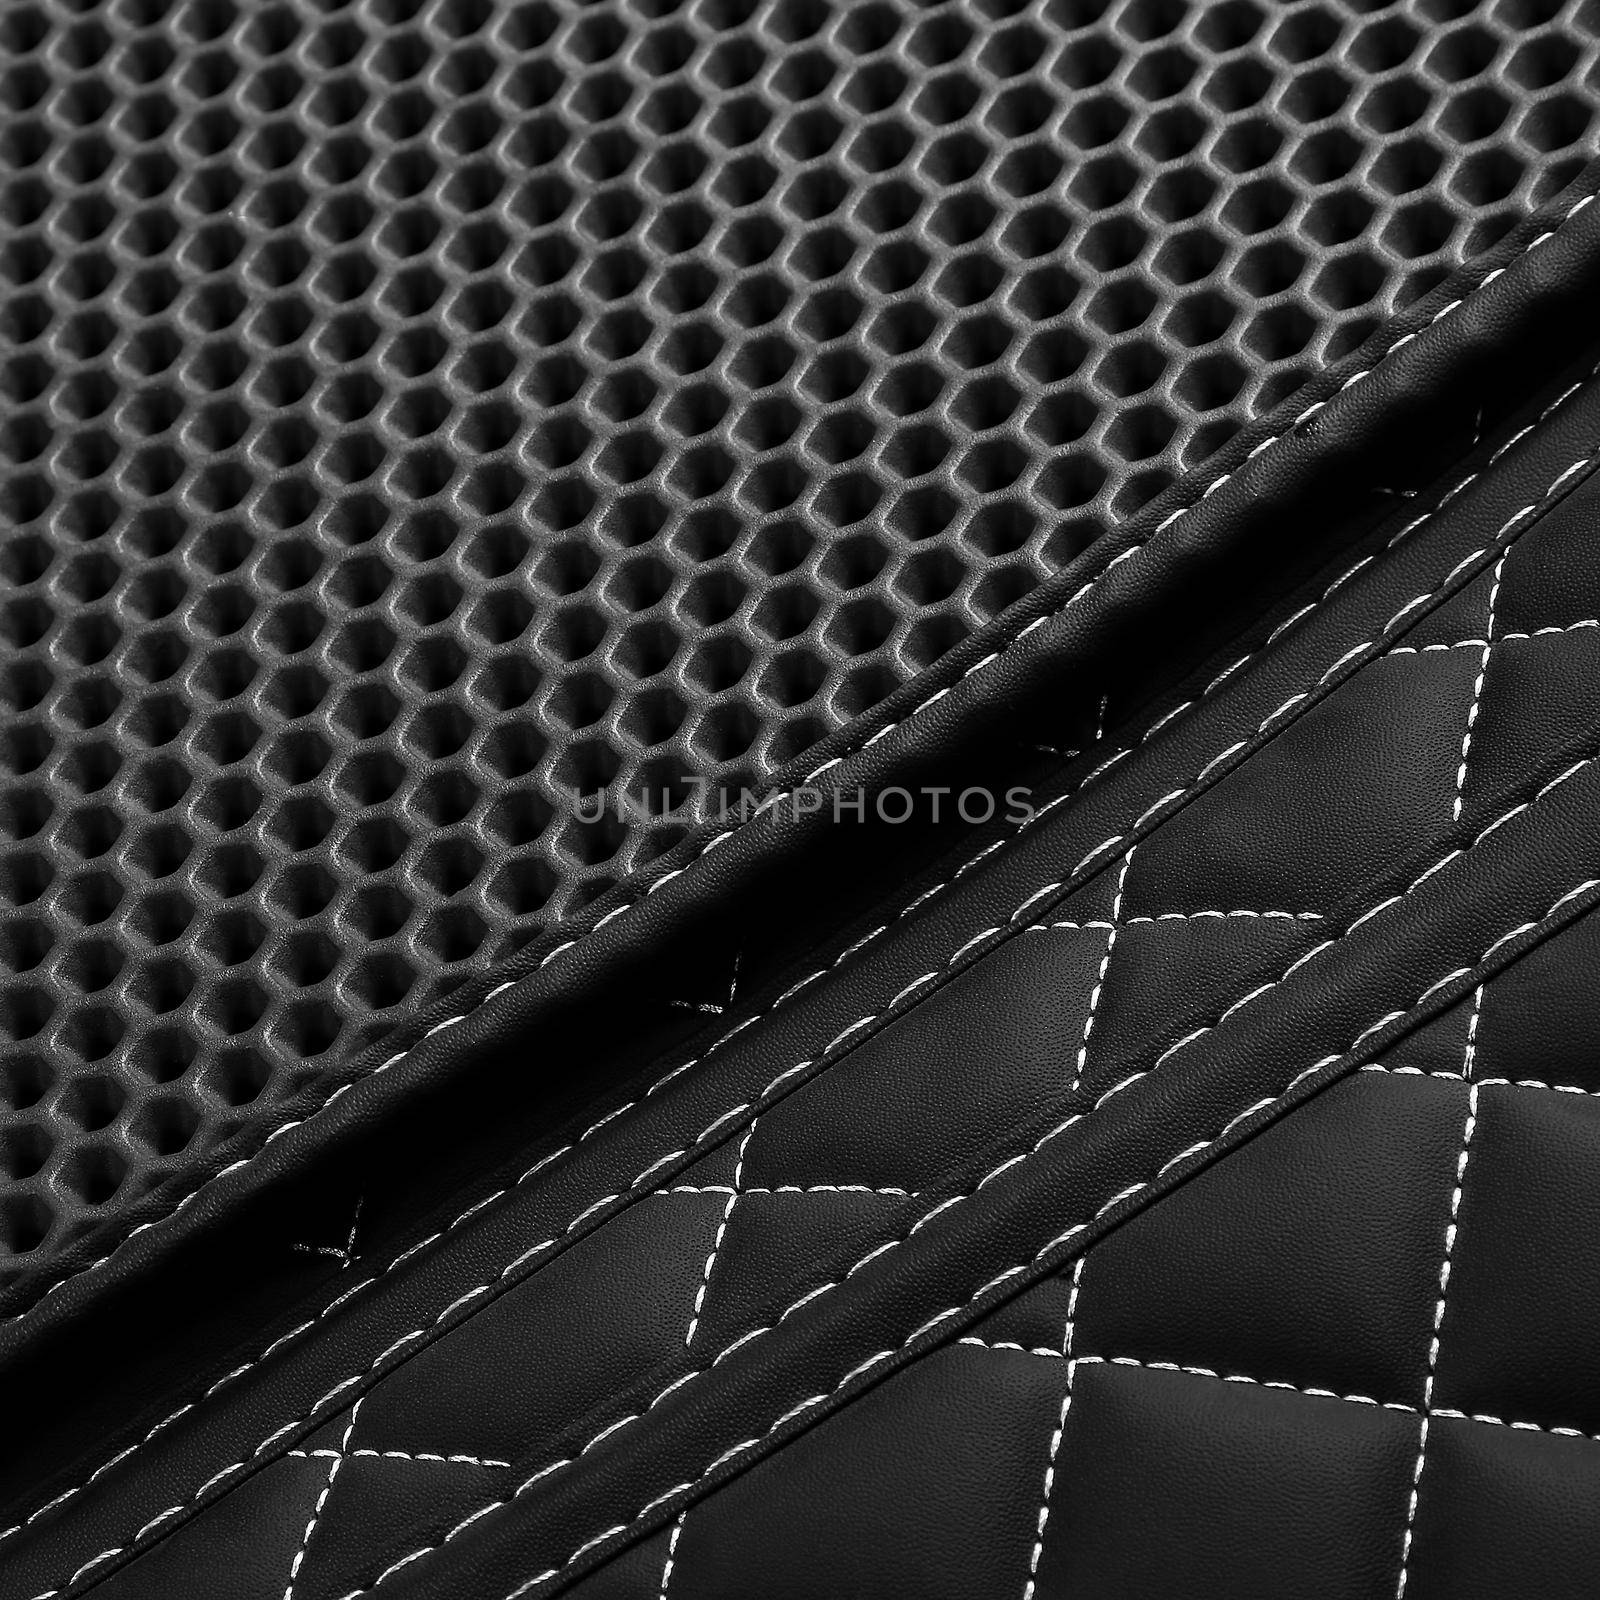 Texture of black leather background with square pattern and stitch, macro